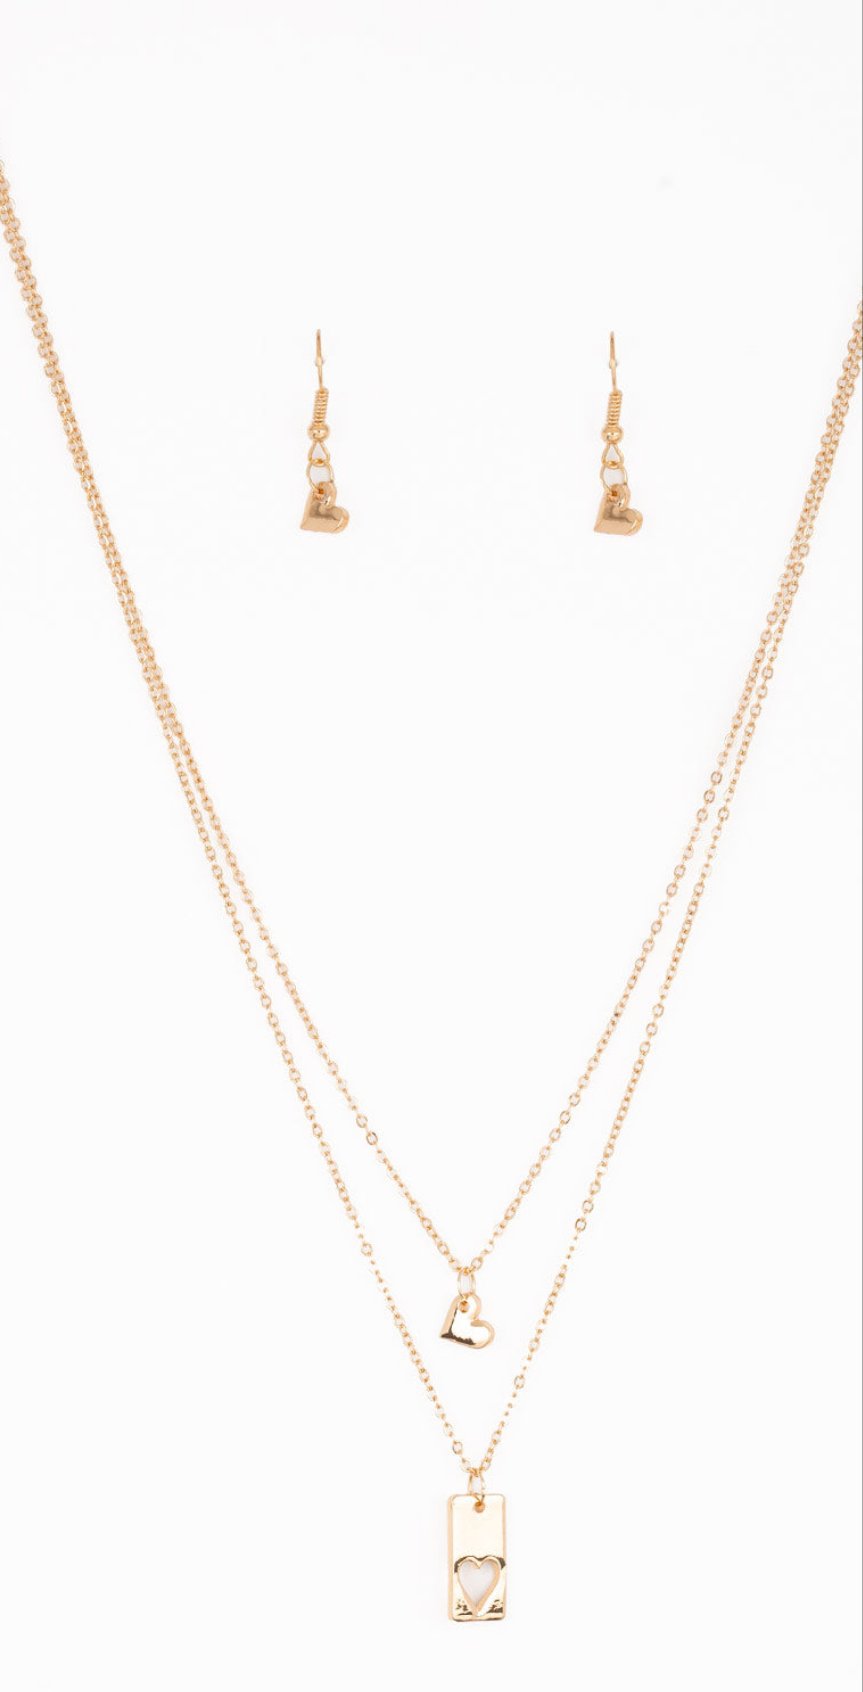 Not Your Damsel Gold Necklace and Earrings